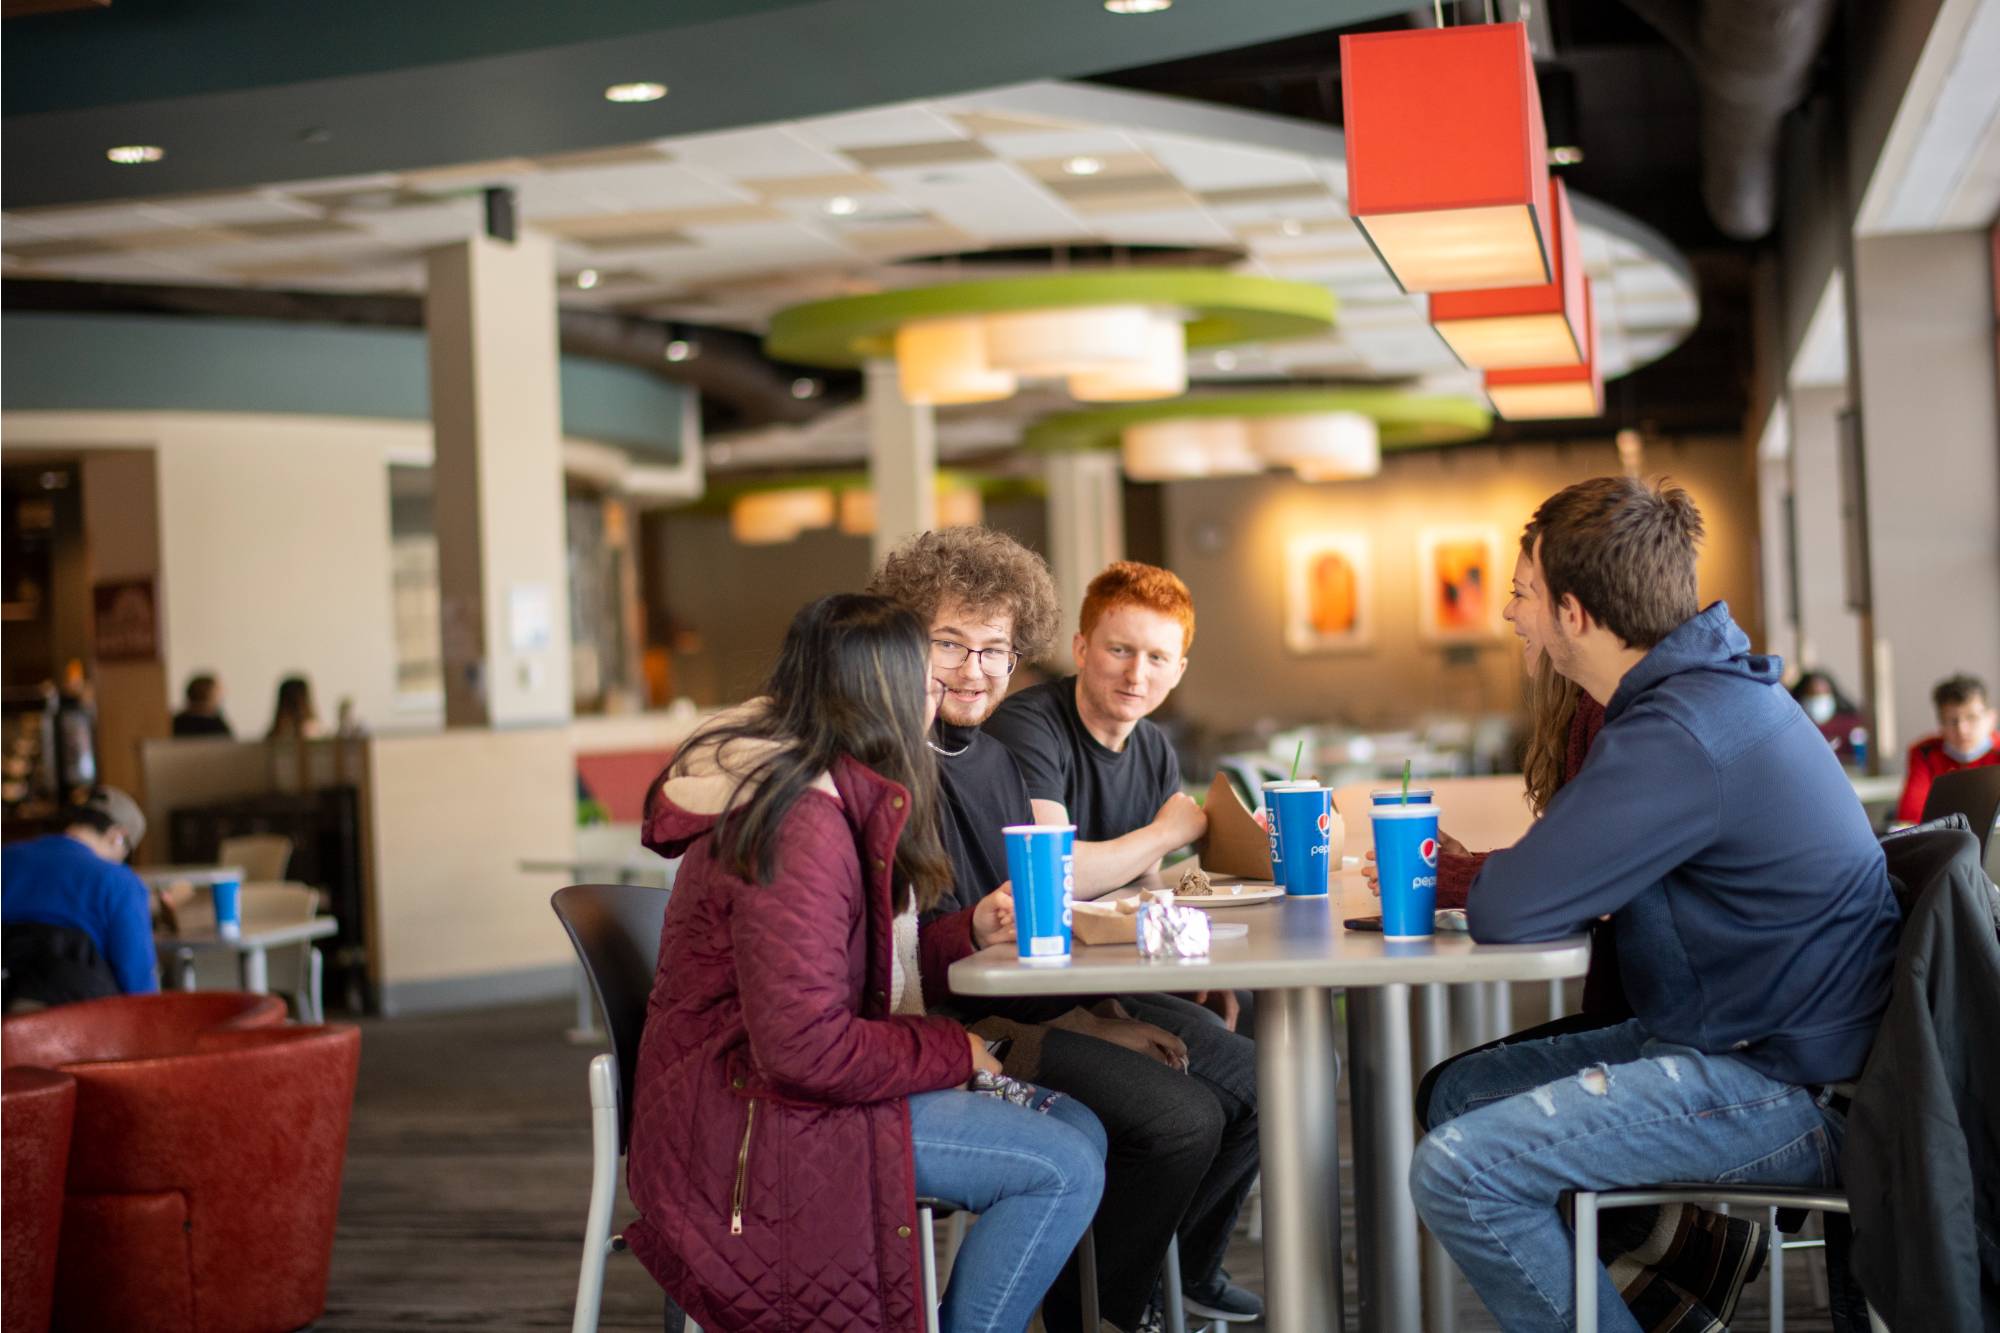 Kleiner-Commons is a popular dining location on Grand Valley's North Campus.